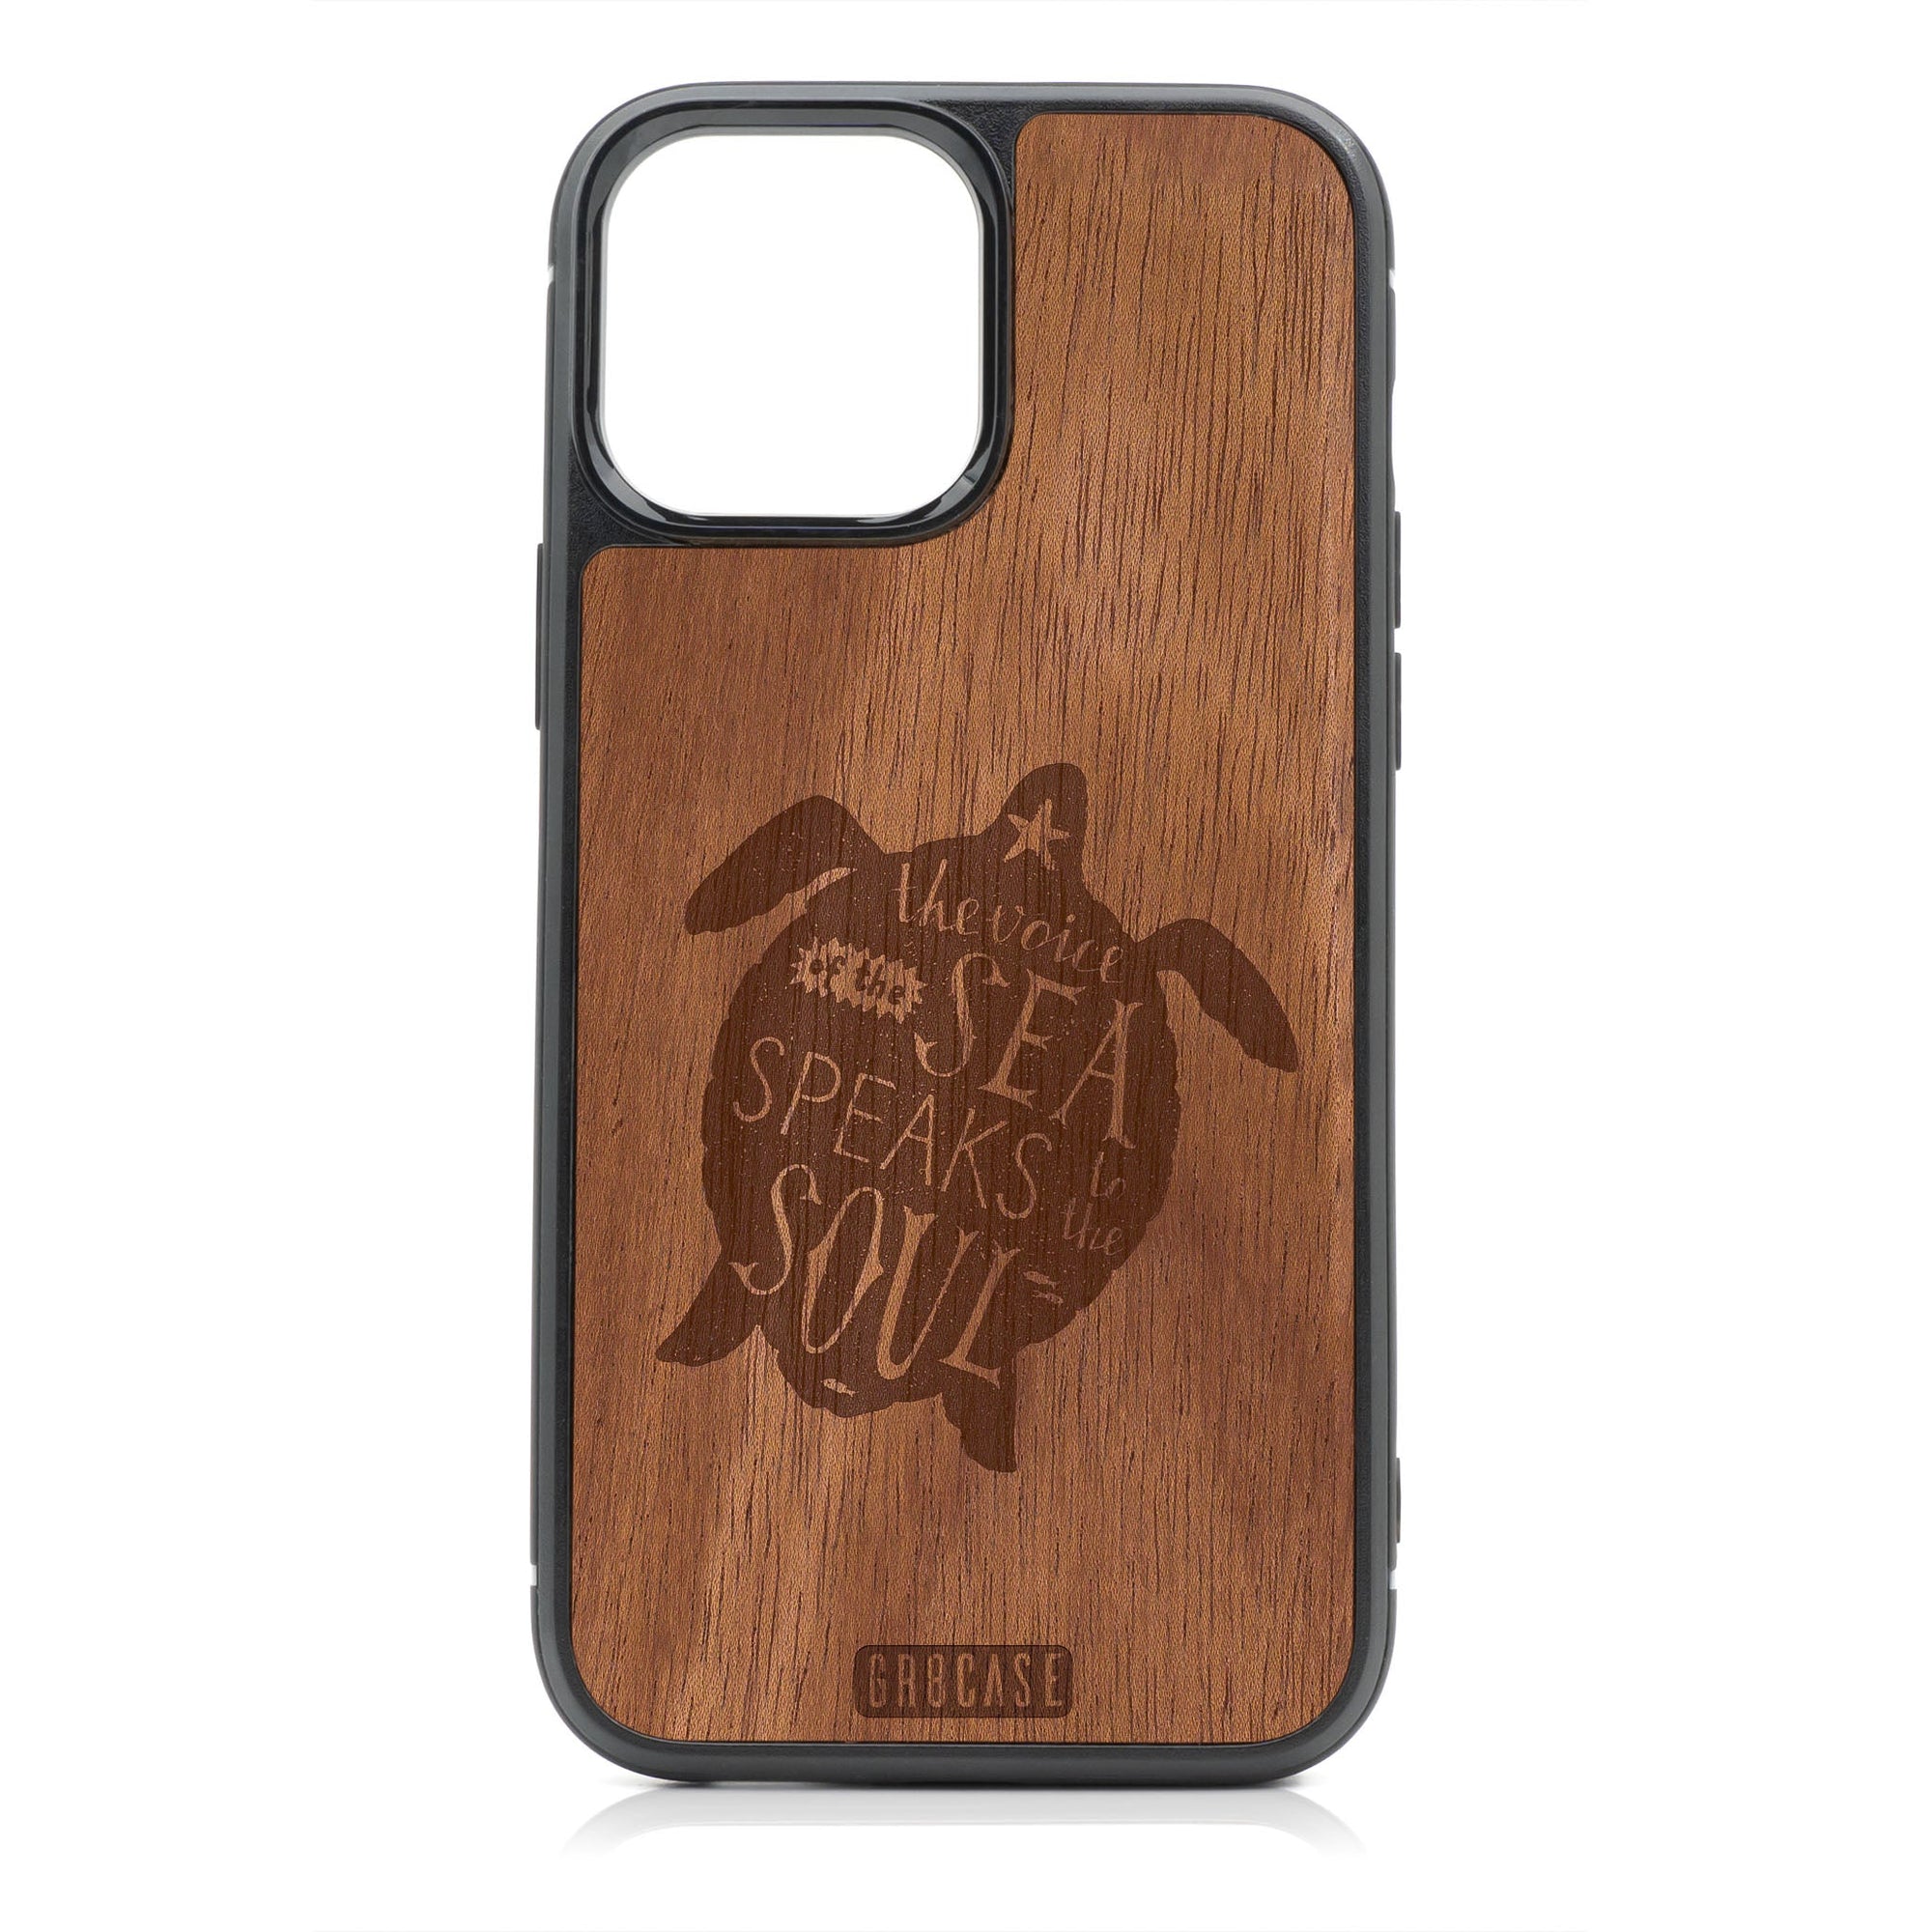 The Voice Of The Sea Speaks To The Soul (Turtle) Design Wood Case For iPhone 14 Pro Max